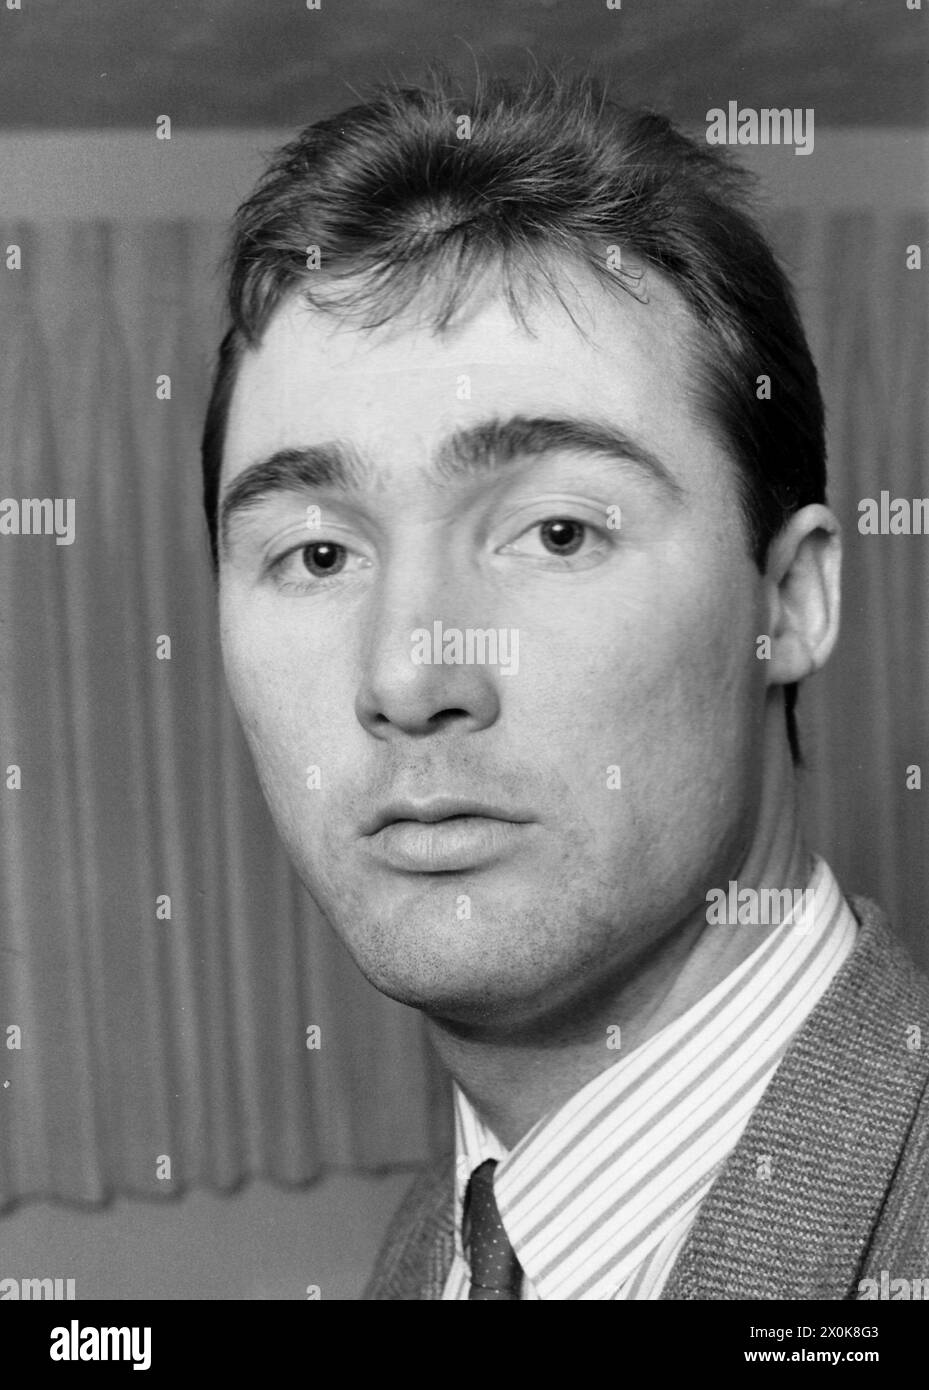 PETER WILLIAMSON, A HERO OF THE HERALD OF FREE ENTERPRISE FERRY DISASTER 1N 1987 HAS DIED IN A MOTOR BIKE ACCIDENT. JULY 1989 PIC MIKE WALKER 1989 Stock Photo